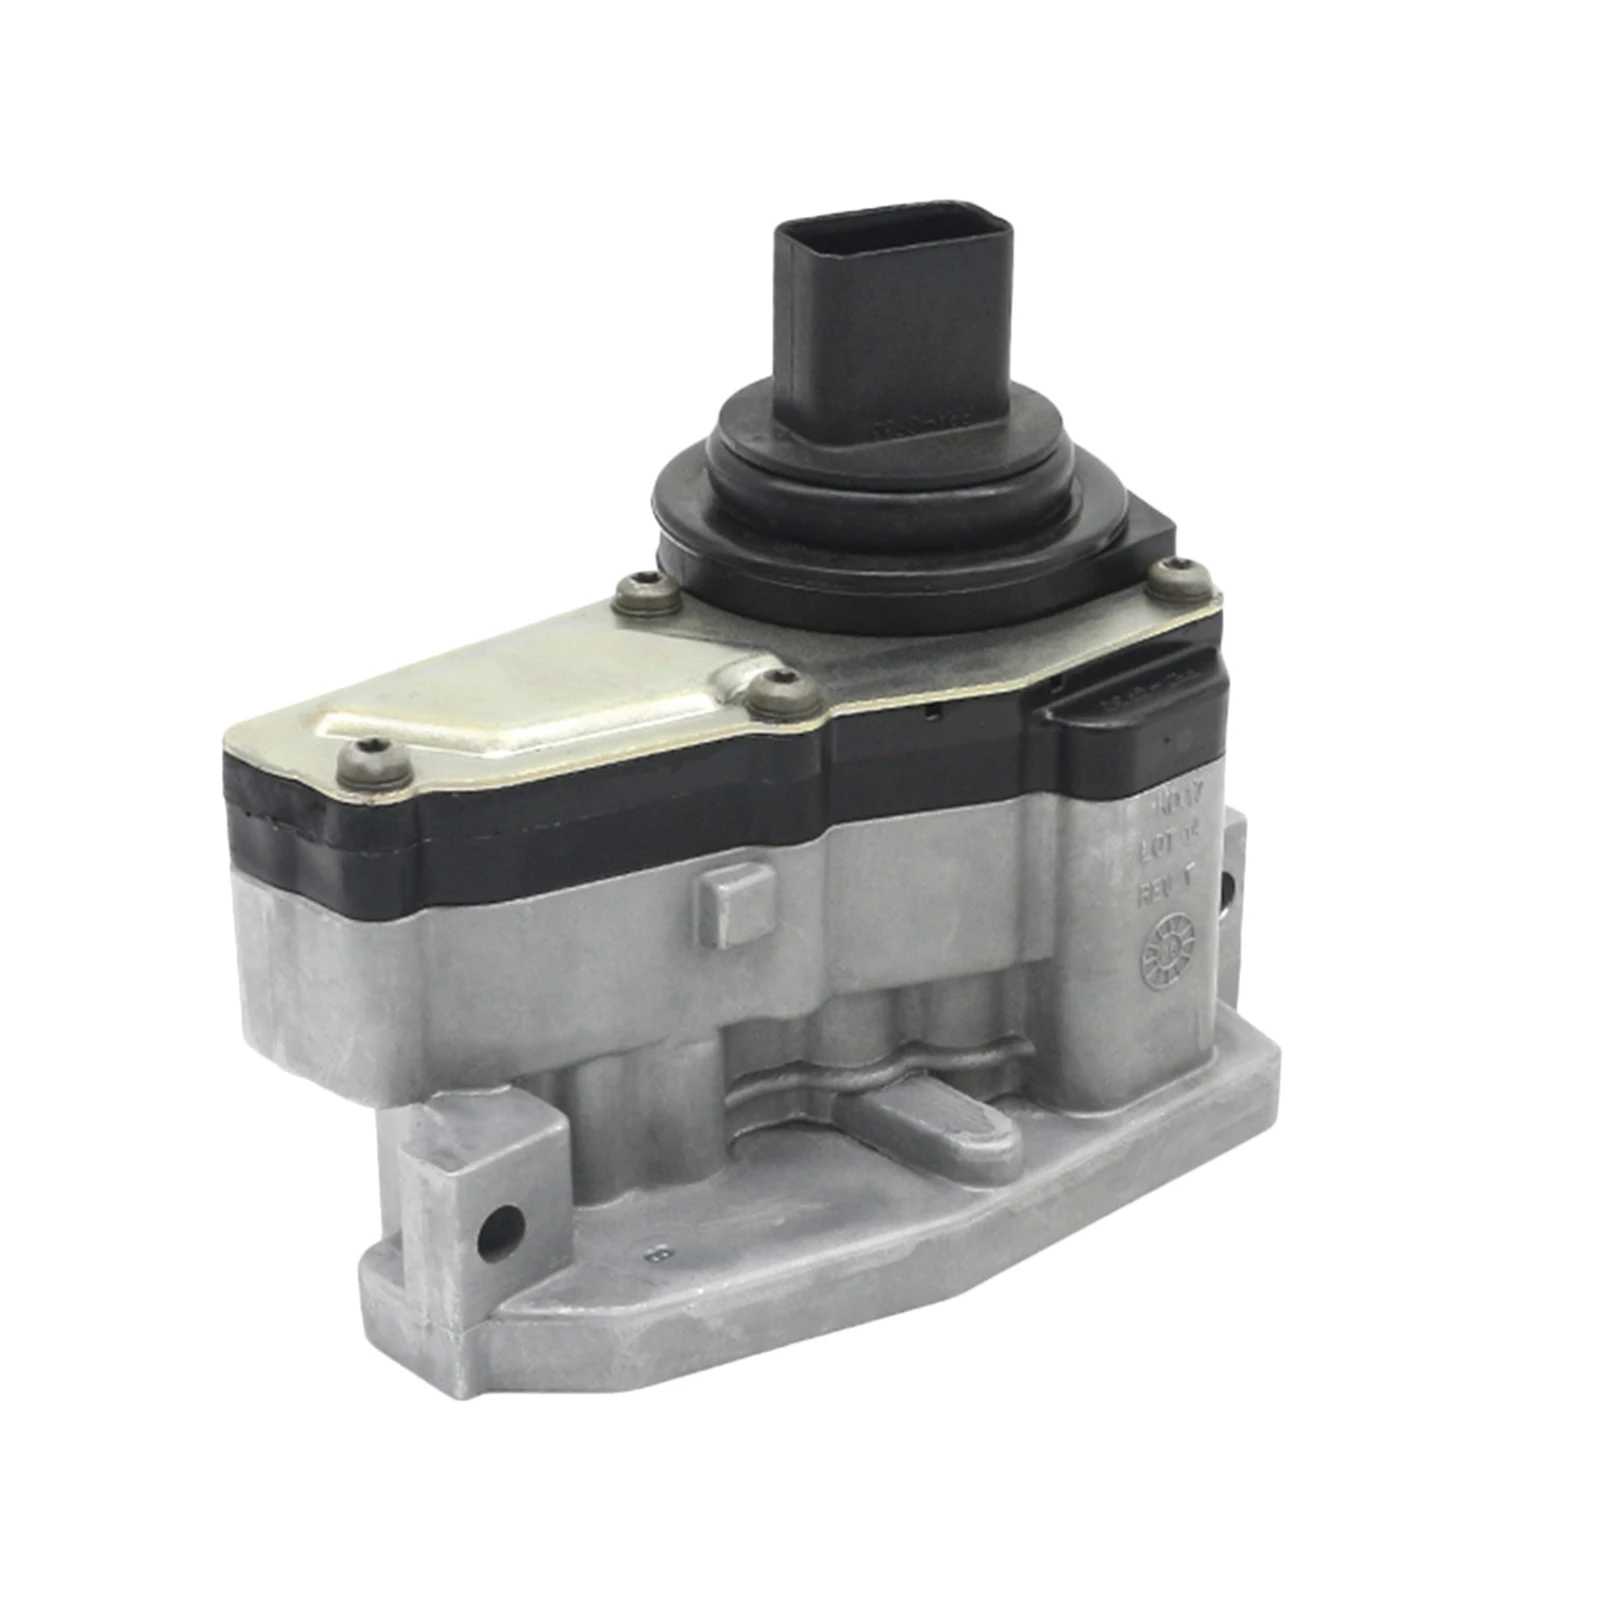 

New Transmission Solenoid Block Solenoid Pack for Chrysler 04800171AA Excellent Mechanical Stability